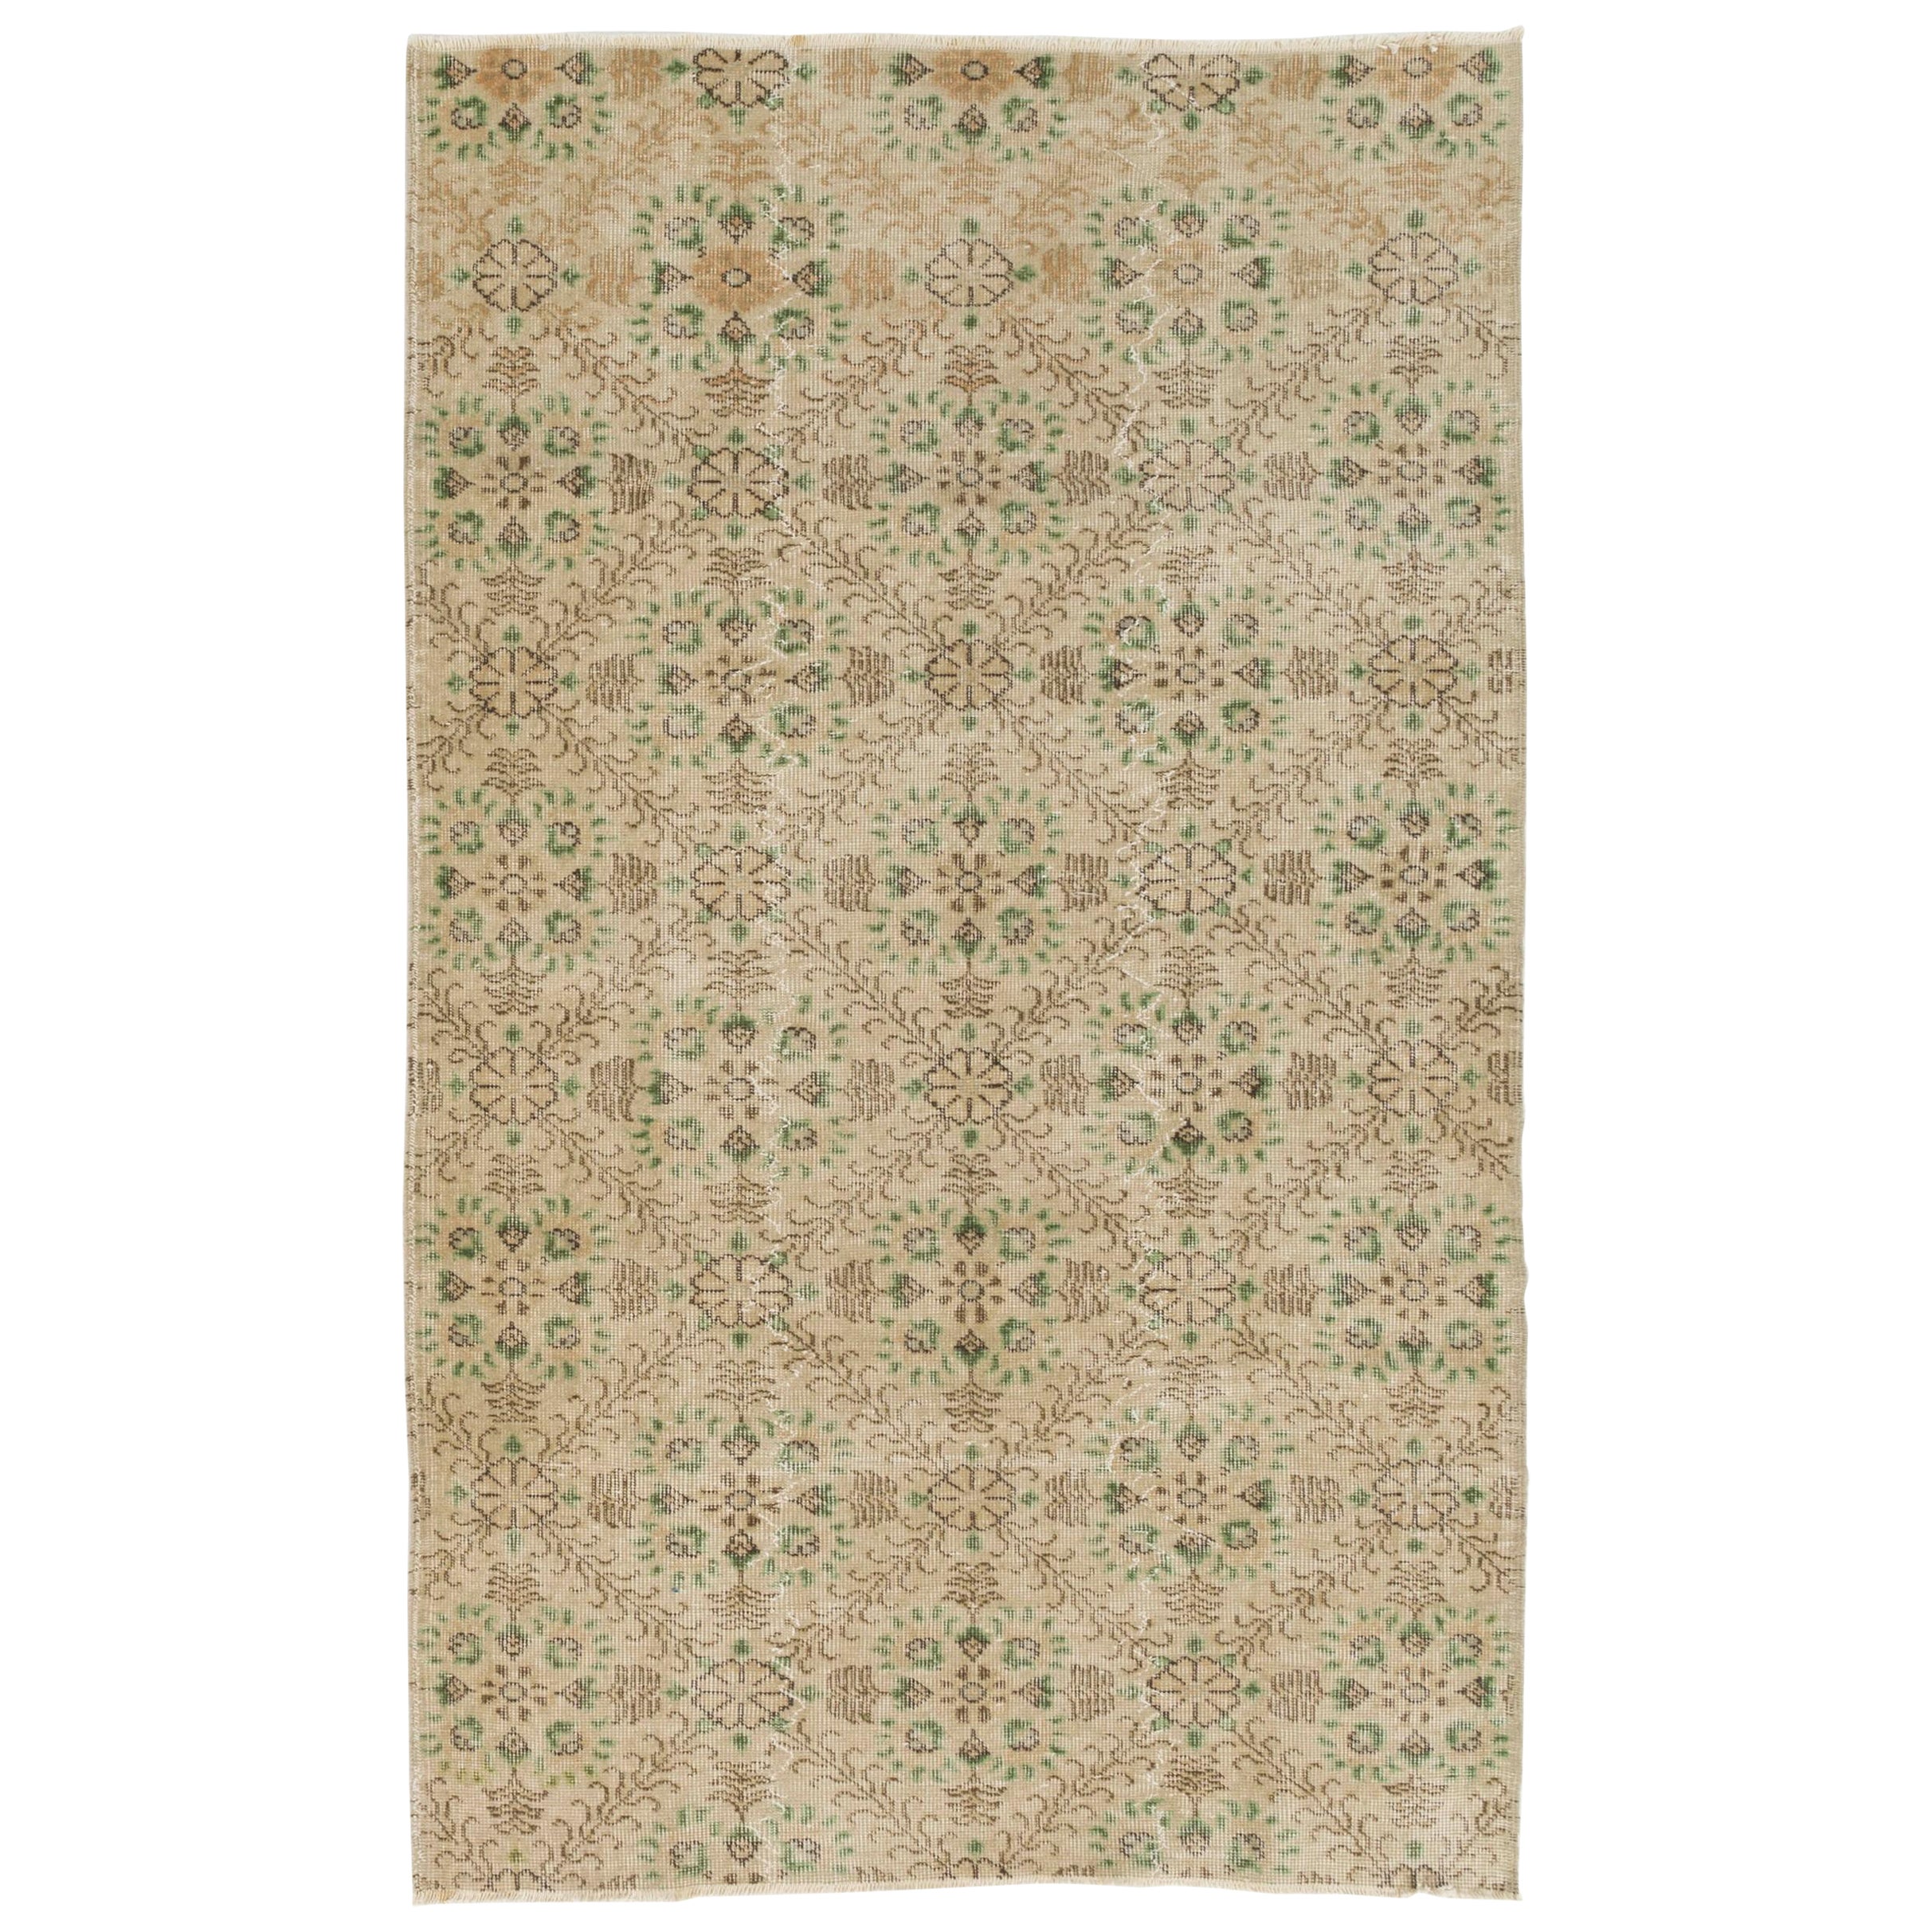 4x6.6 ft Vintage Hand-knotted Turkish Floral Wool Rug in Soft Pastel Tones